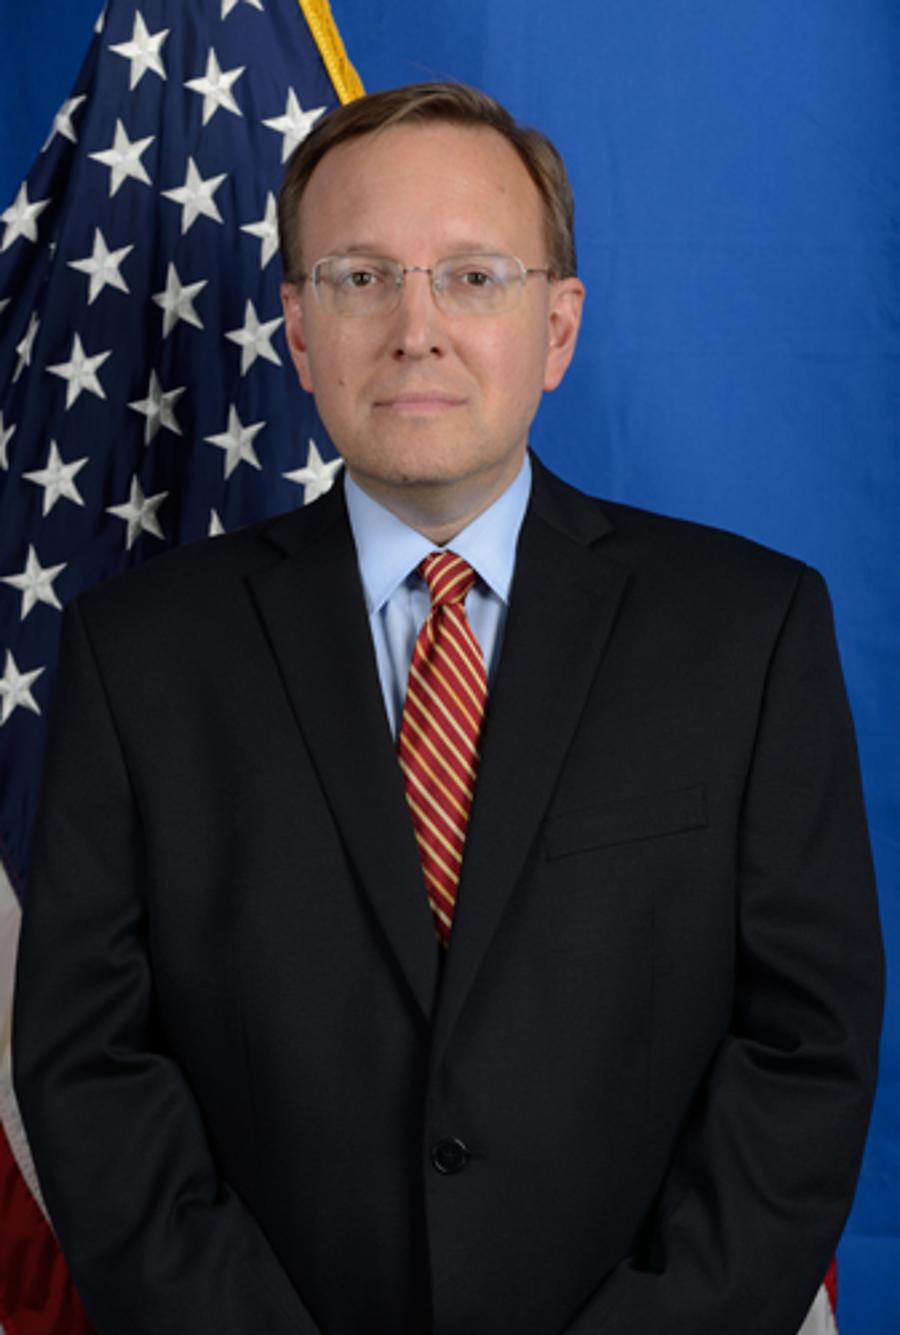 Statement On Central European University By U.S. Embassy Charge d' Affaires David Kostelancik